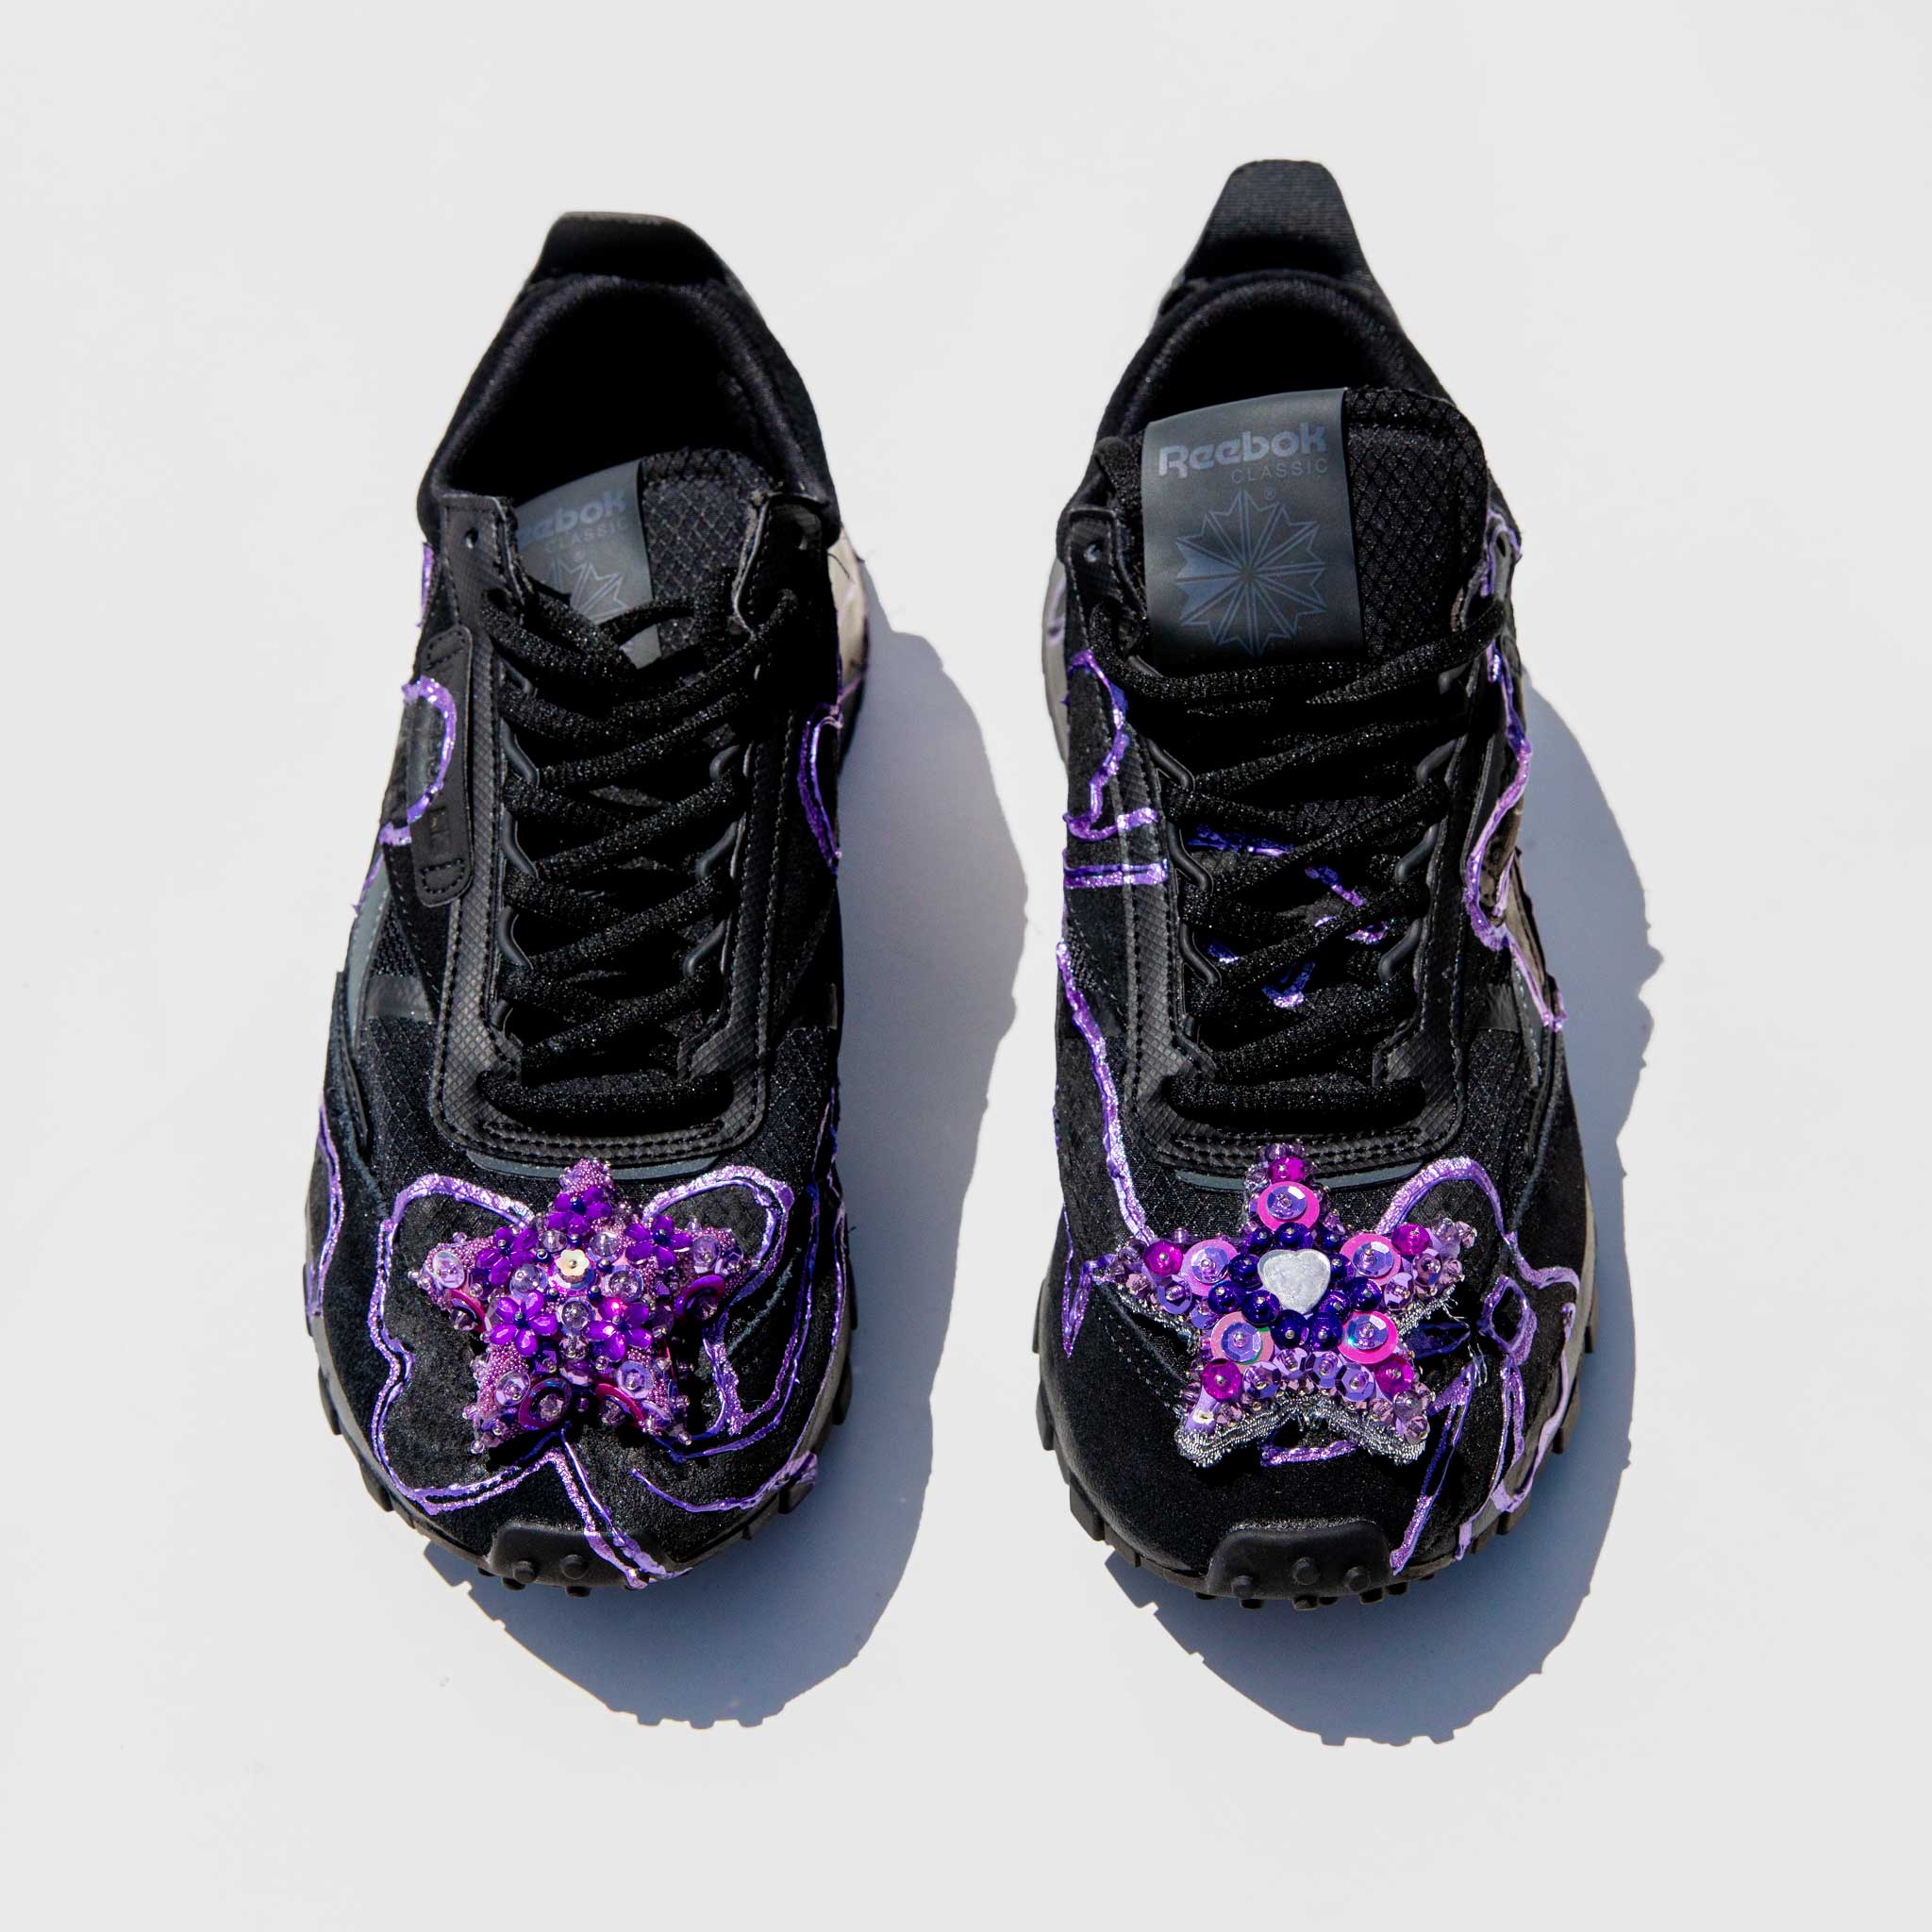 Top straight view of the collina strada reebok sneaker with a purple painted bow detail and a sequin star detail on the toe. 